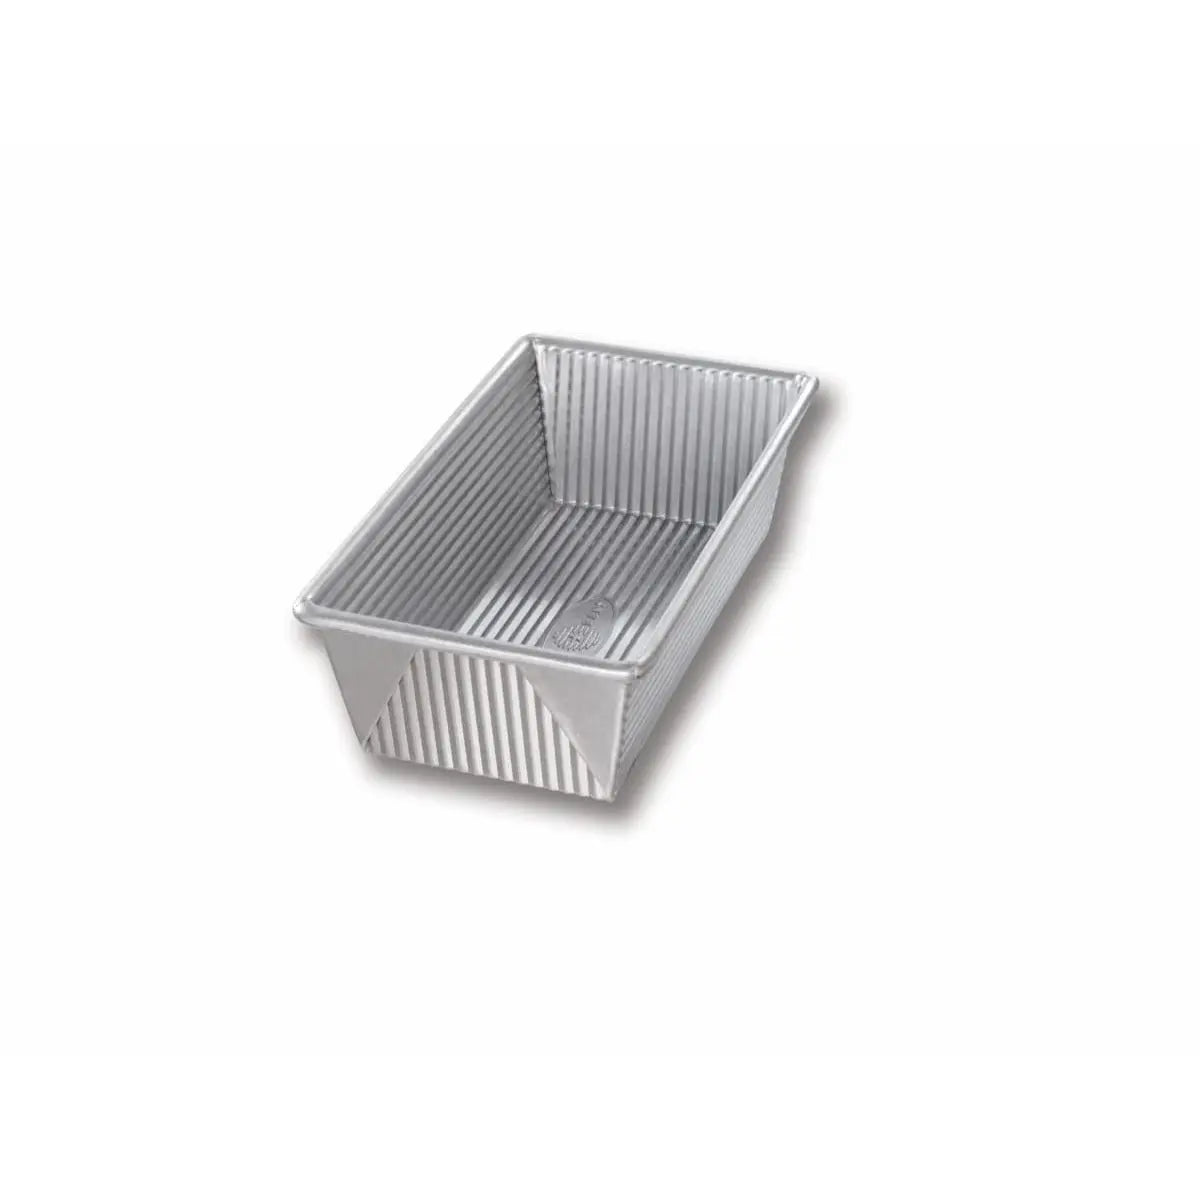 USA Pan Small Loaf Pan, 8.5"x4.5"x2.75" Bread & Loaf Pans Browns Kitchen